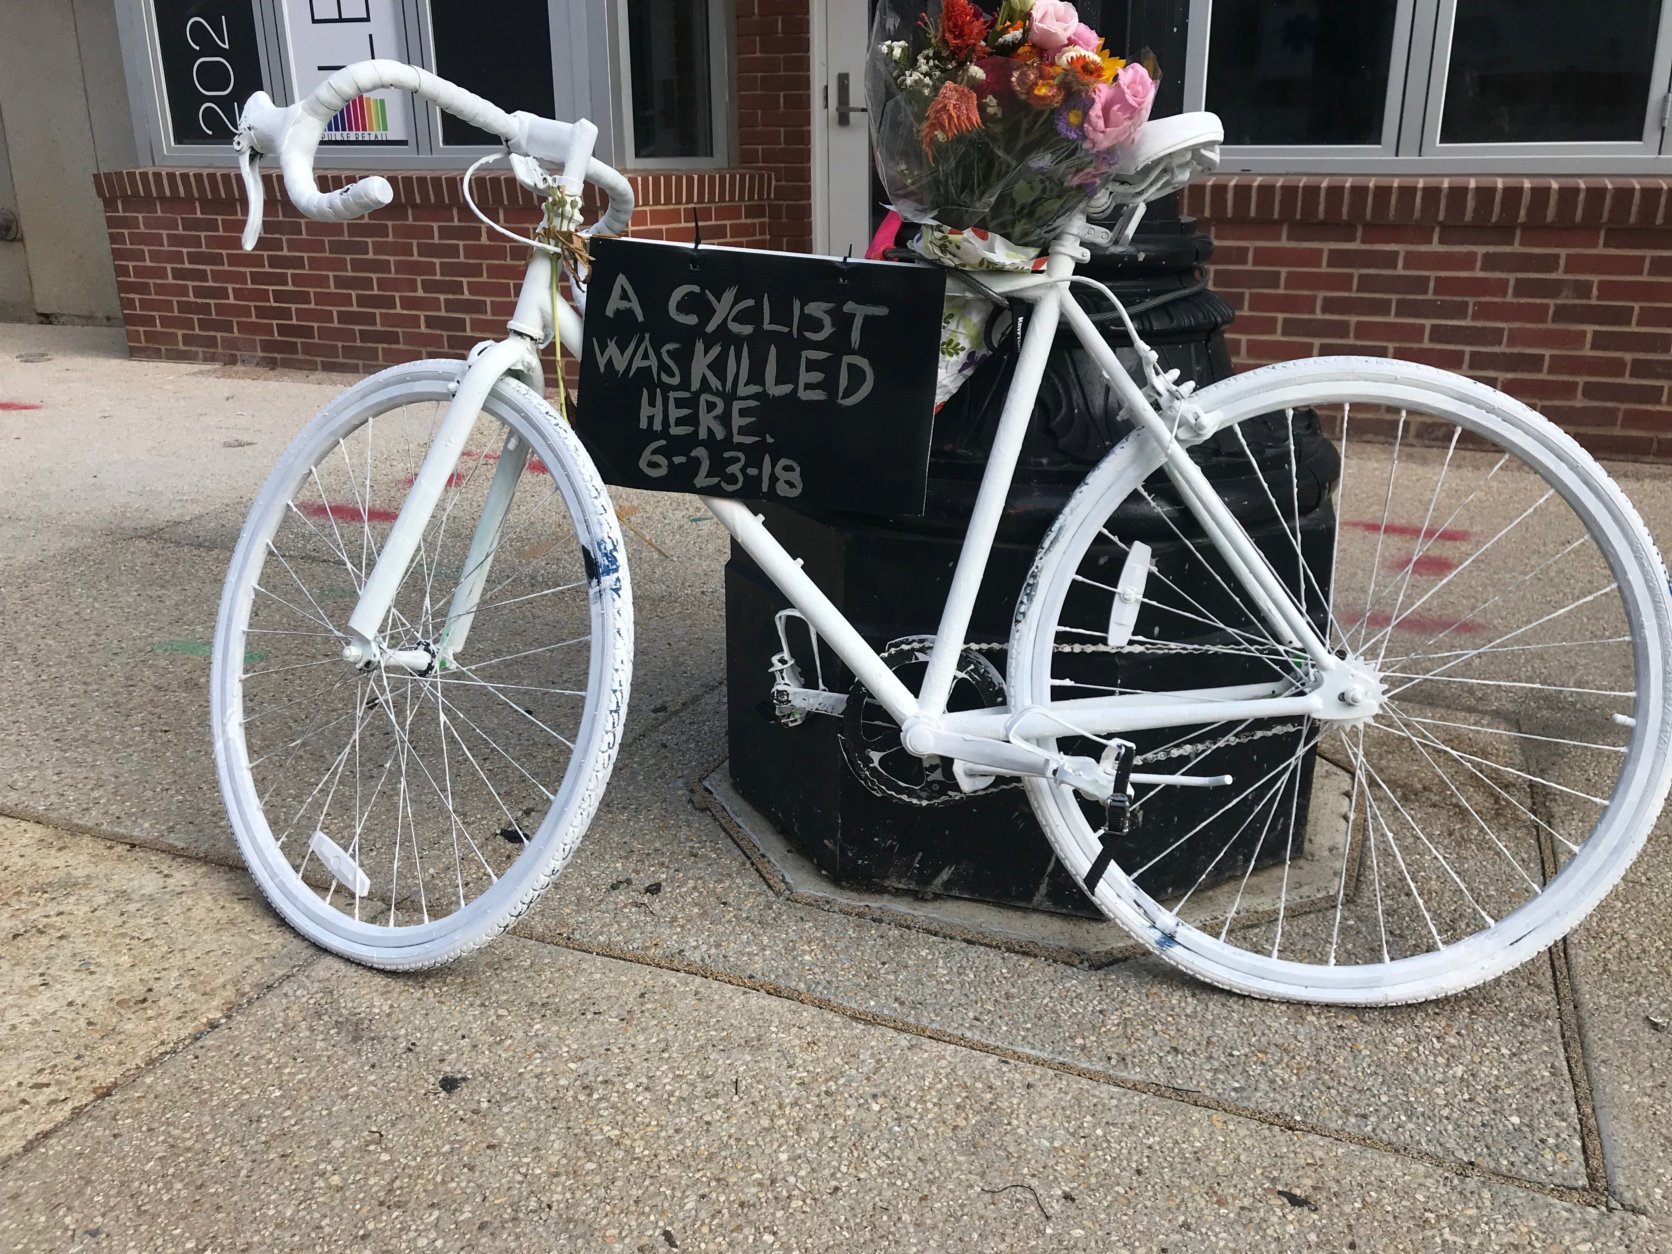 A so-called ghost bike painted white and decorated with a bouquet of flowers marks the spot where 19-year-old Malik Habib died. (WTOP/Dick Uliano)